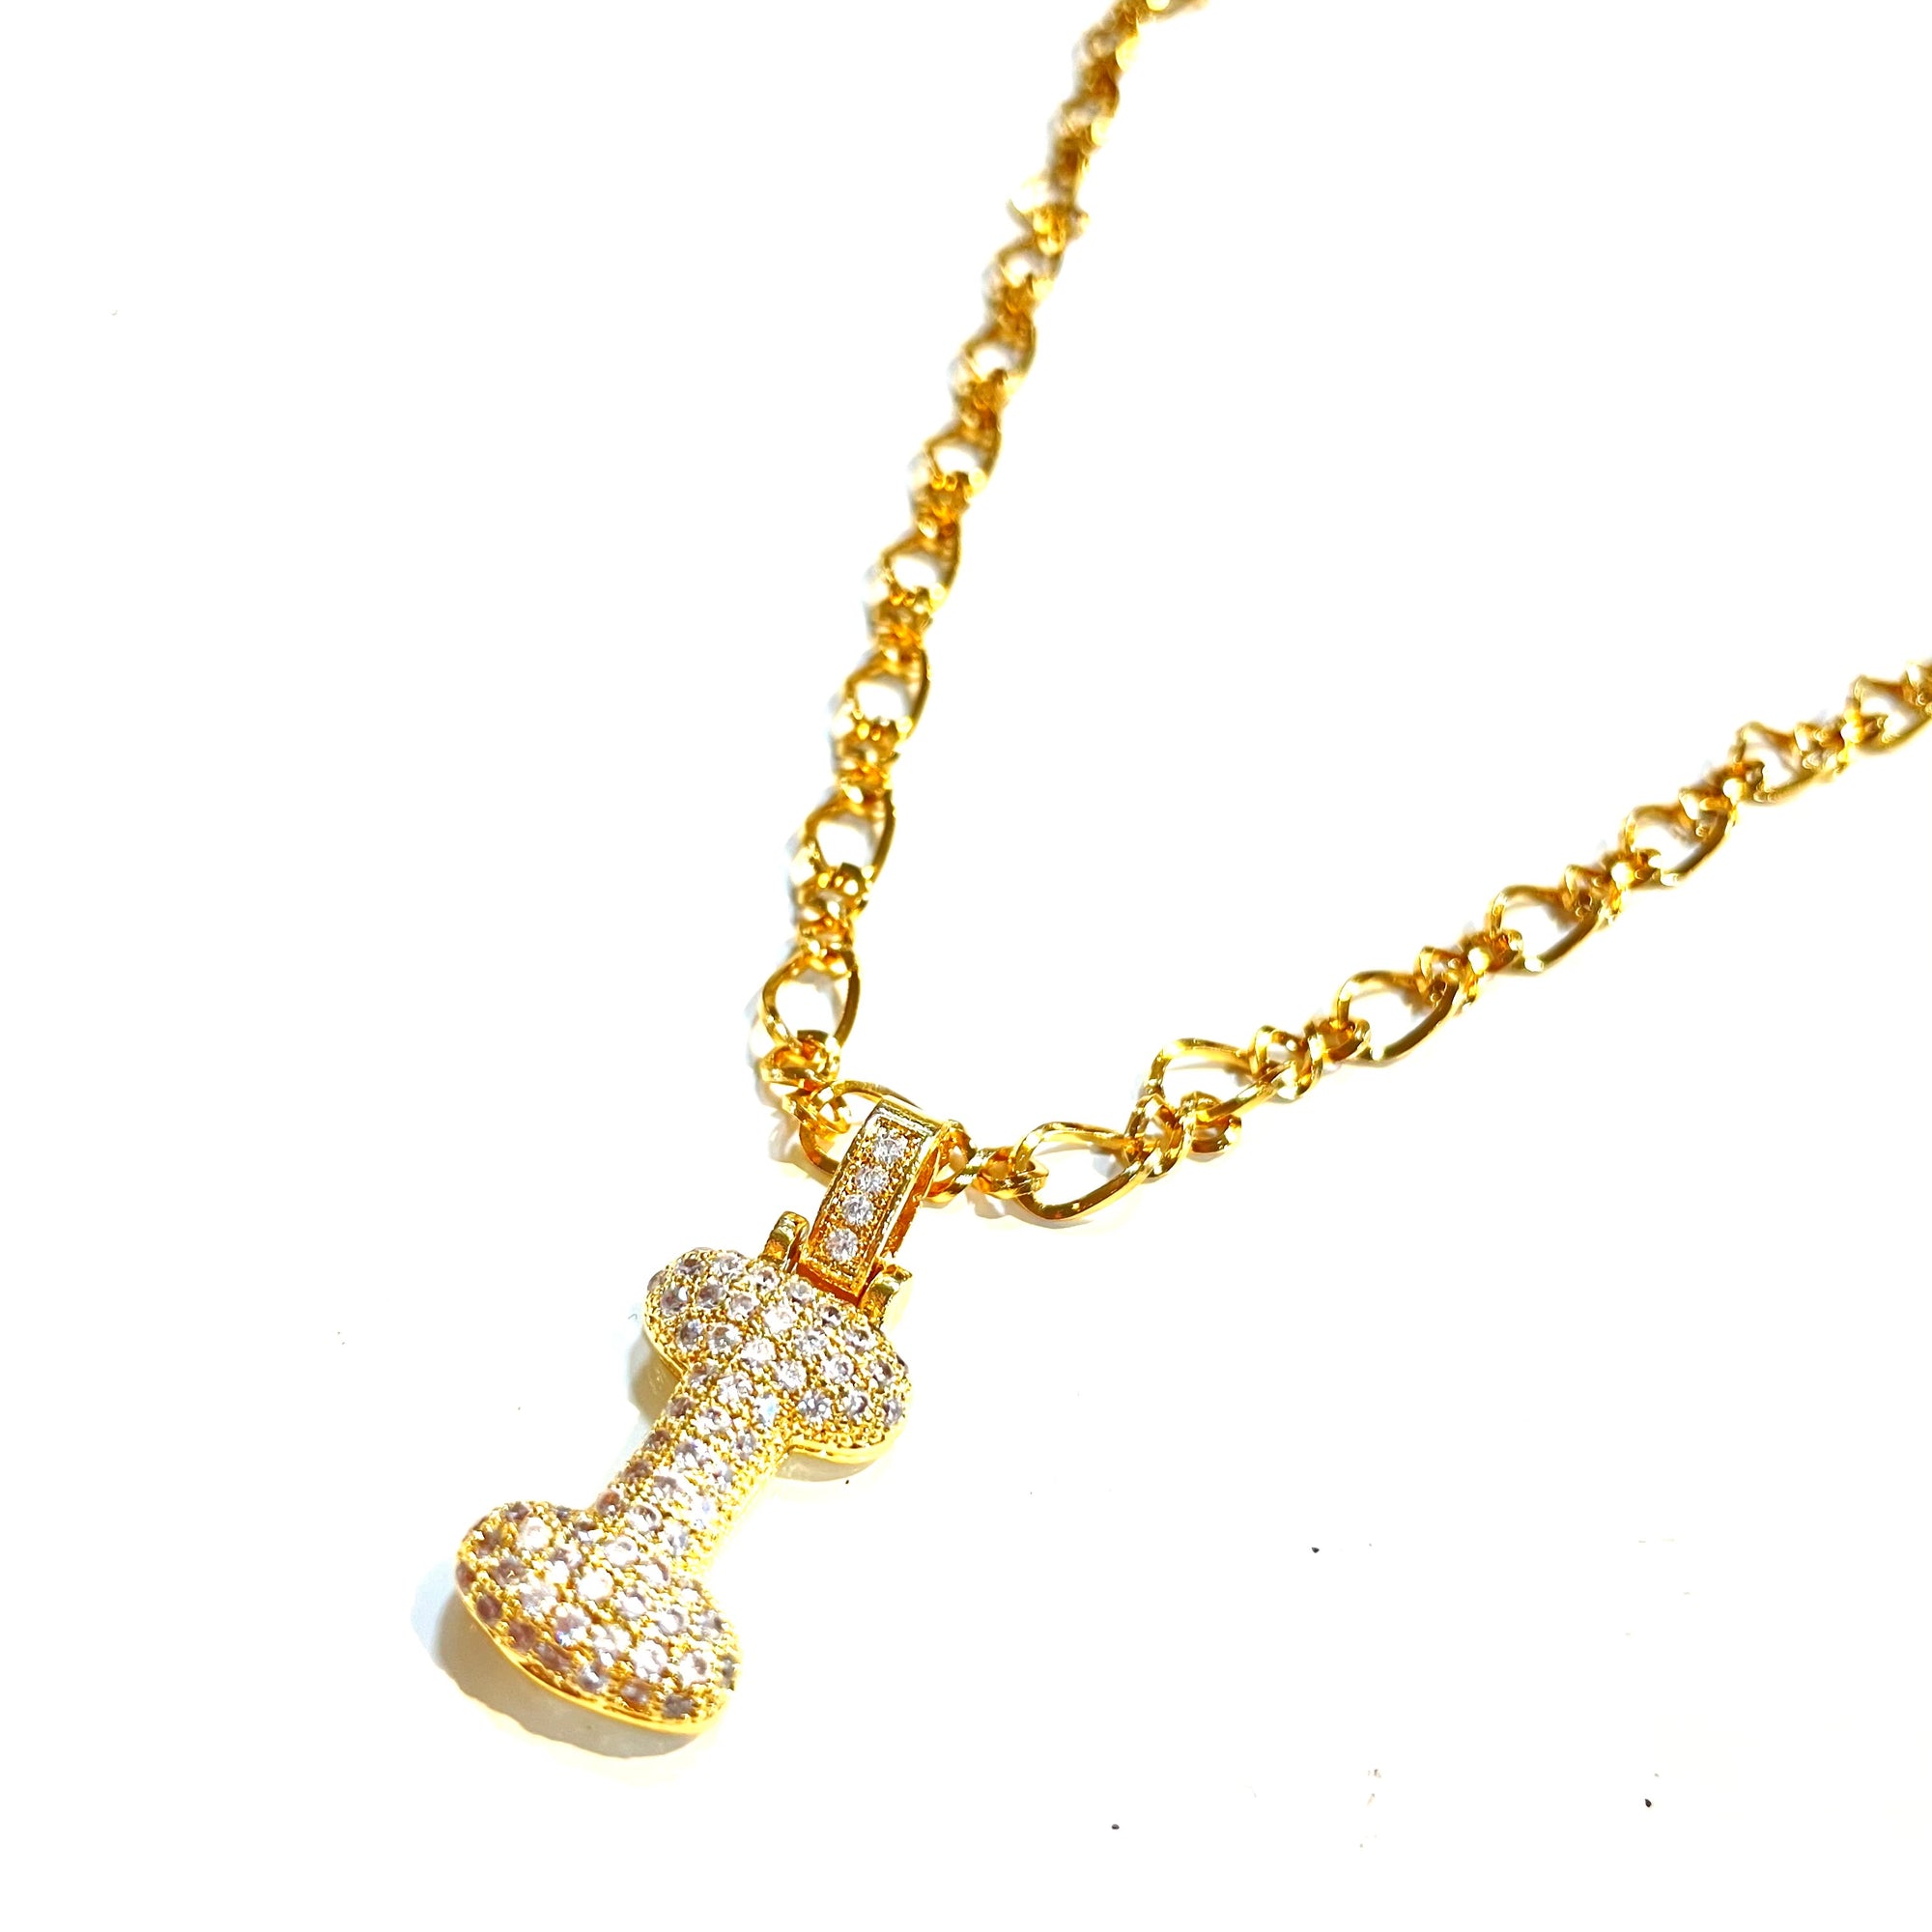 Initial Impression Necklace Necklaces Cerese D, Inc. Gold I 